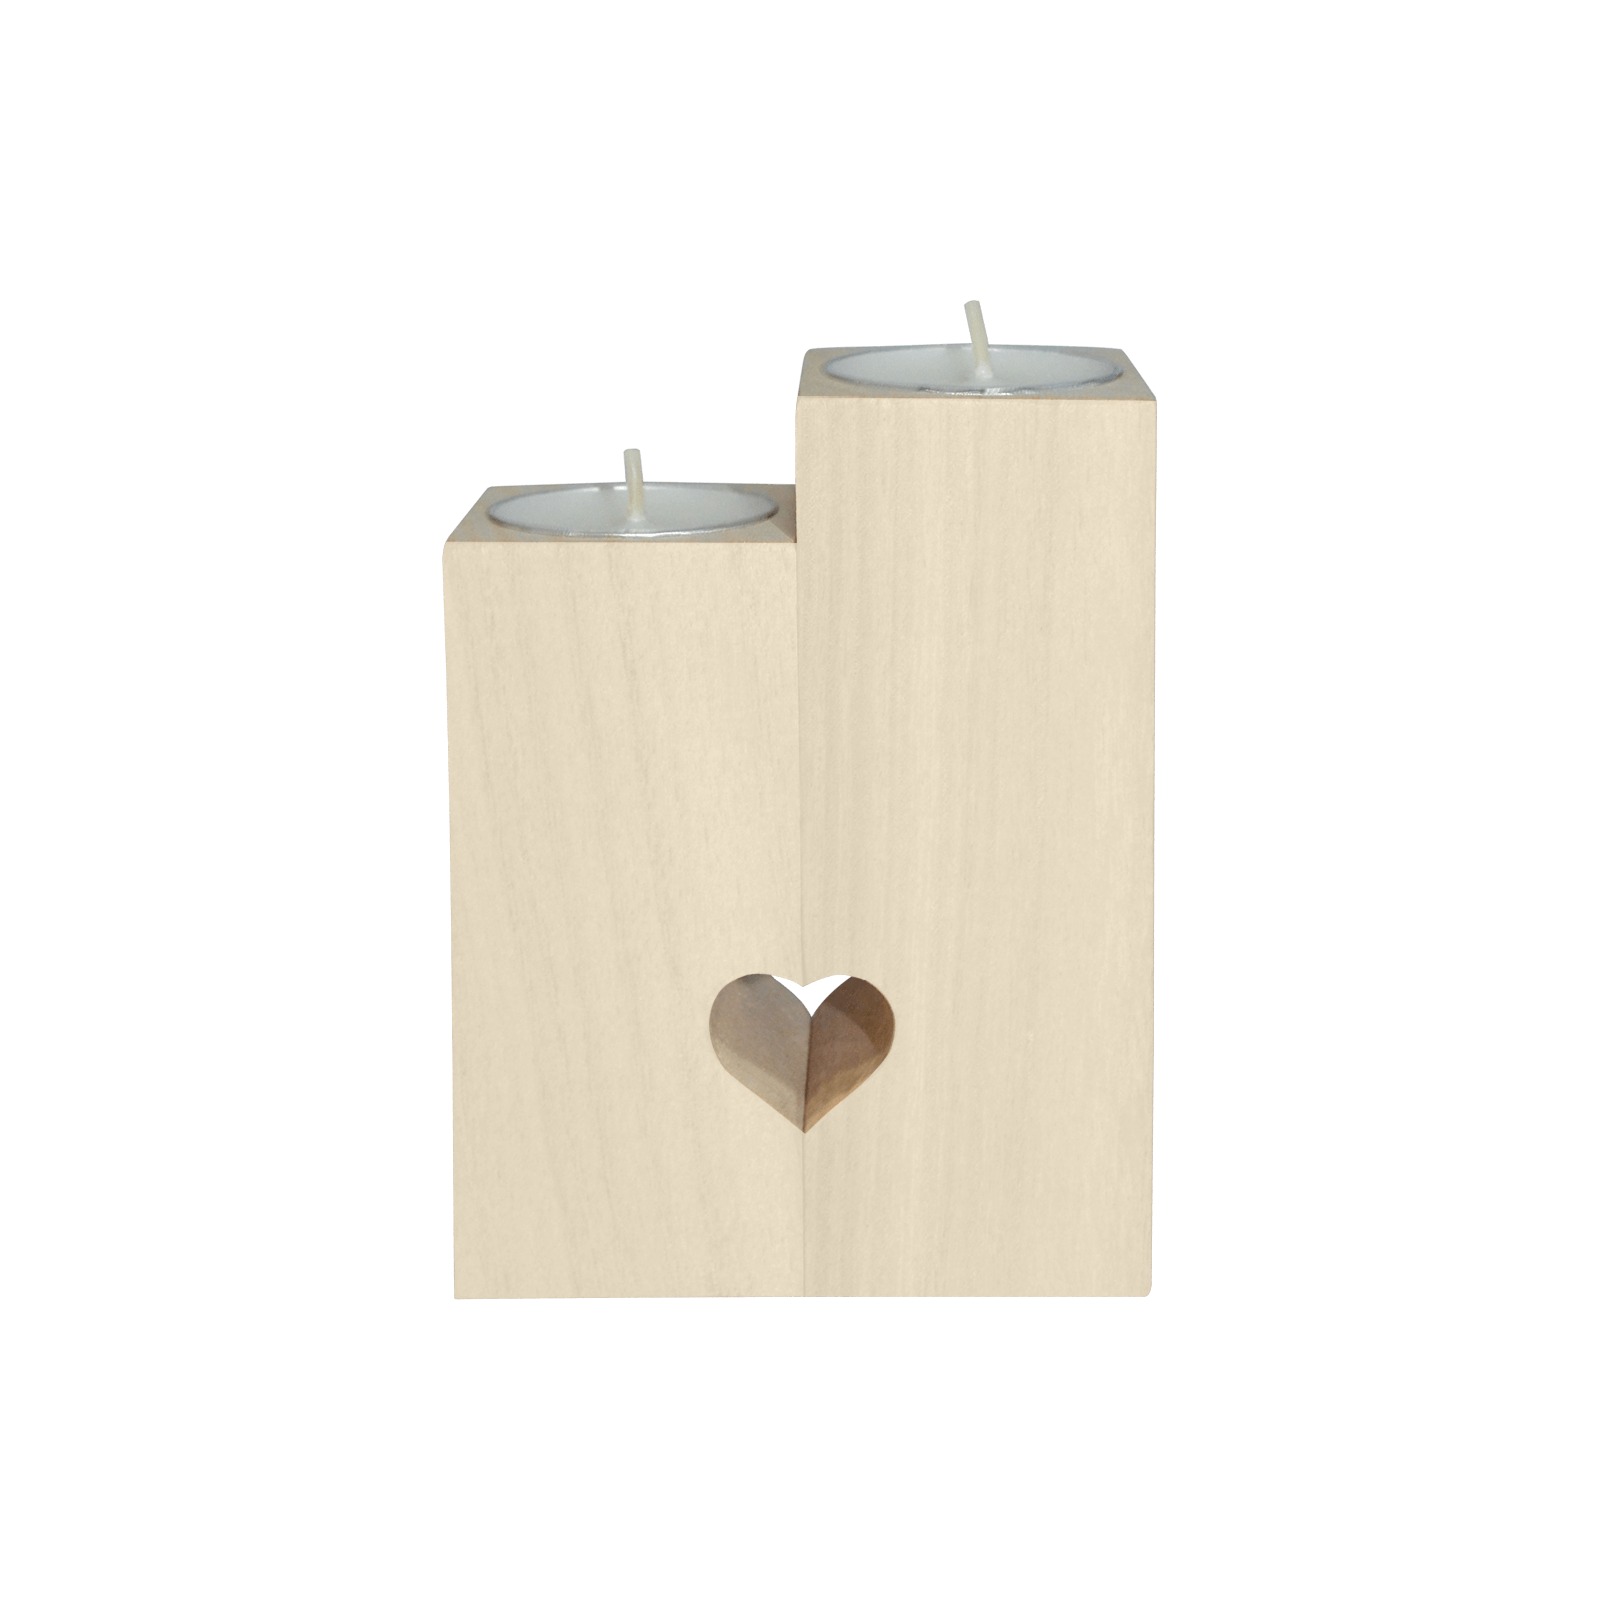 A Smiling Dog Wooden Candle Holder (Without Candle)